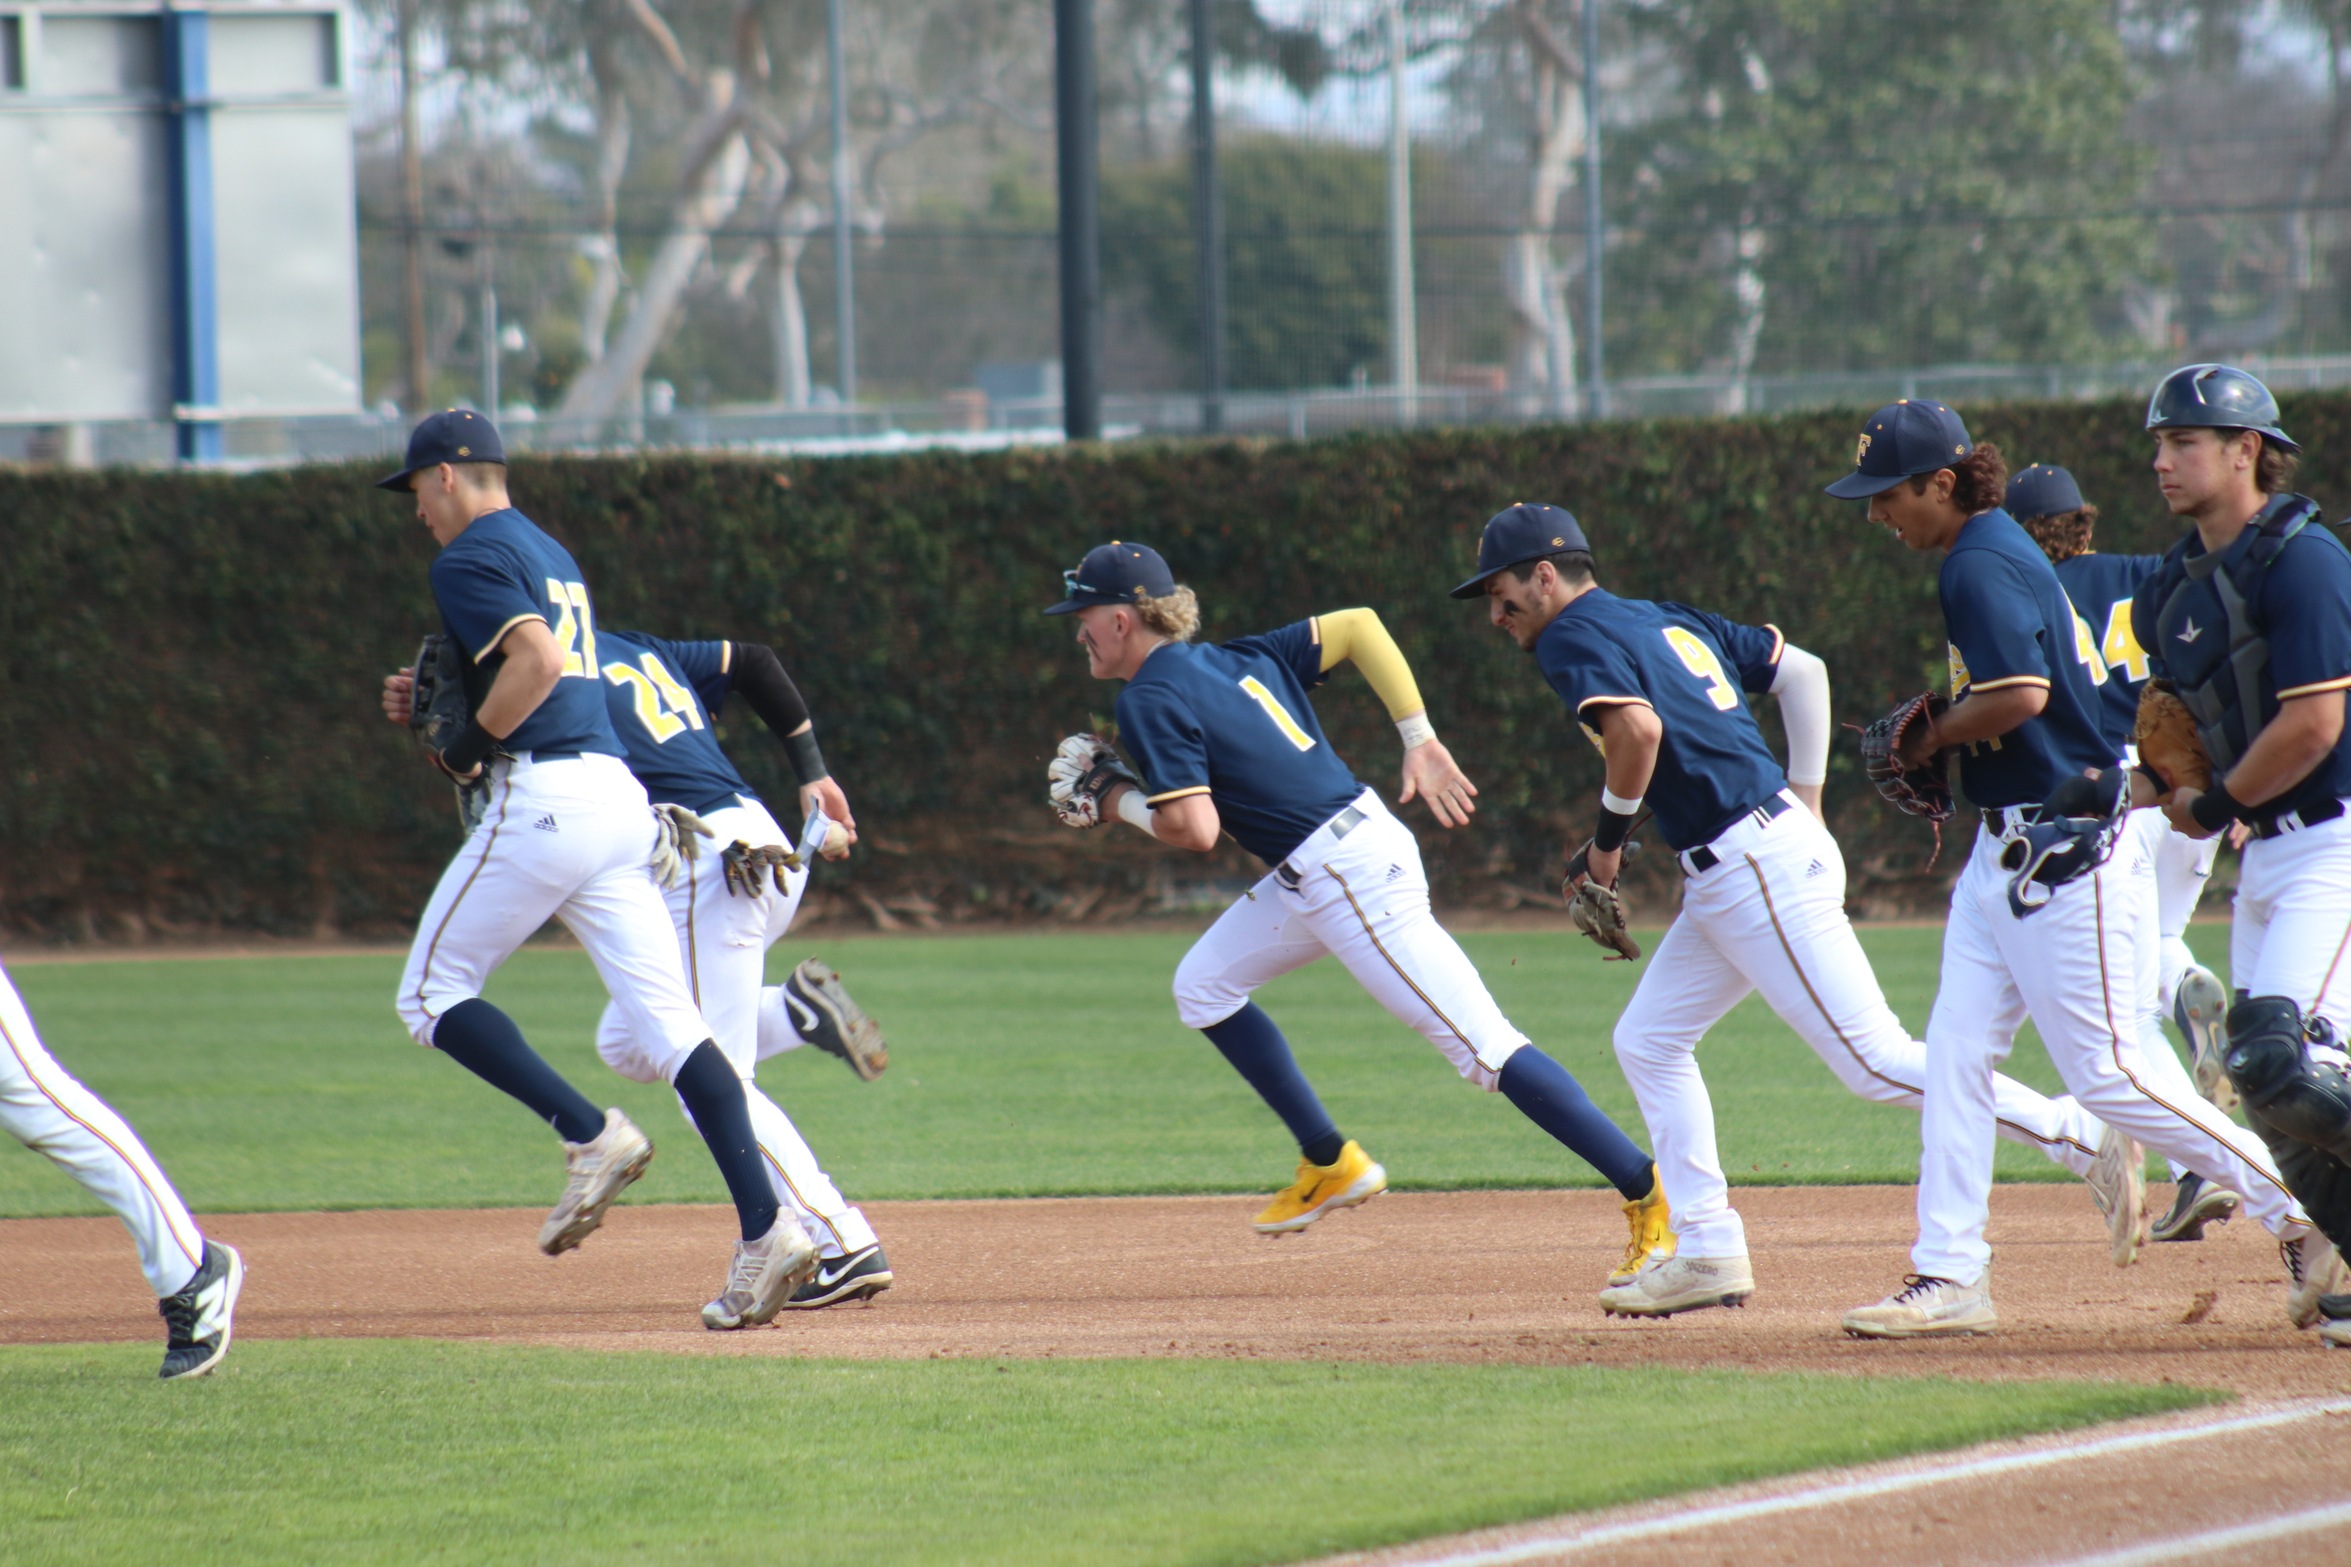 FULLERTON COMPLETES THE SWEEP OVER CYPRESS COLLEGE